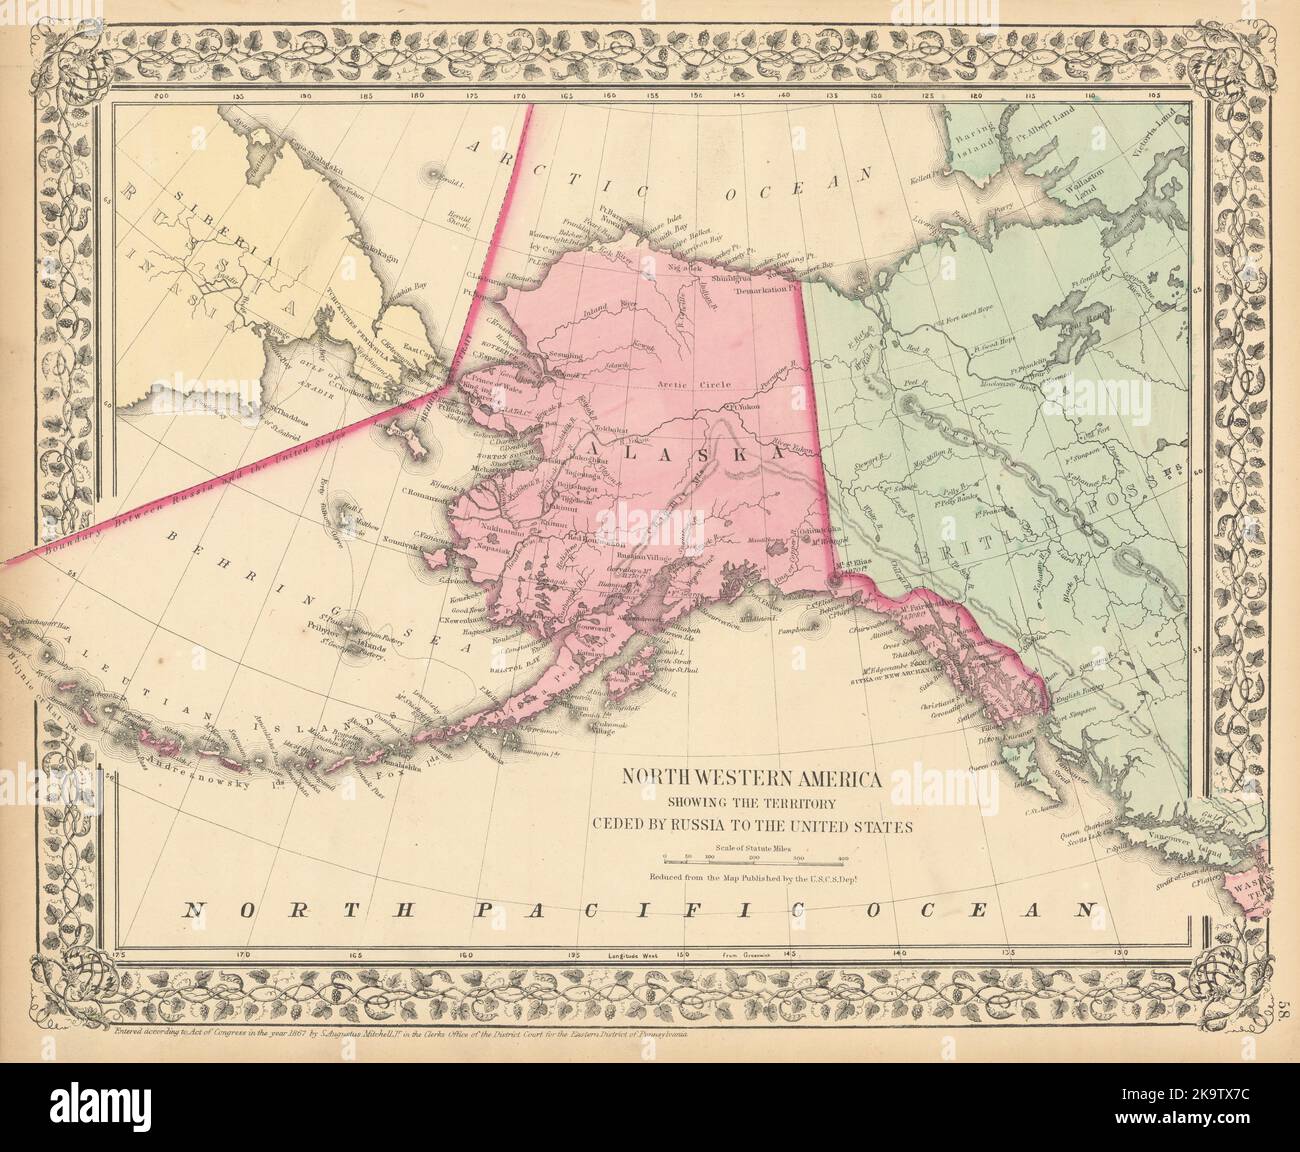 Northwestern America showing… Territory ceded by Russia Alaska MITCHELL 1869 map Stock Photo